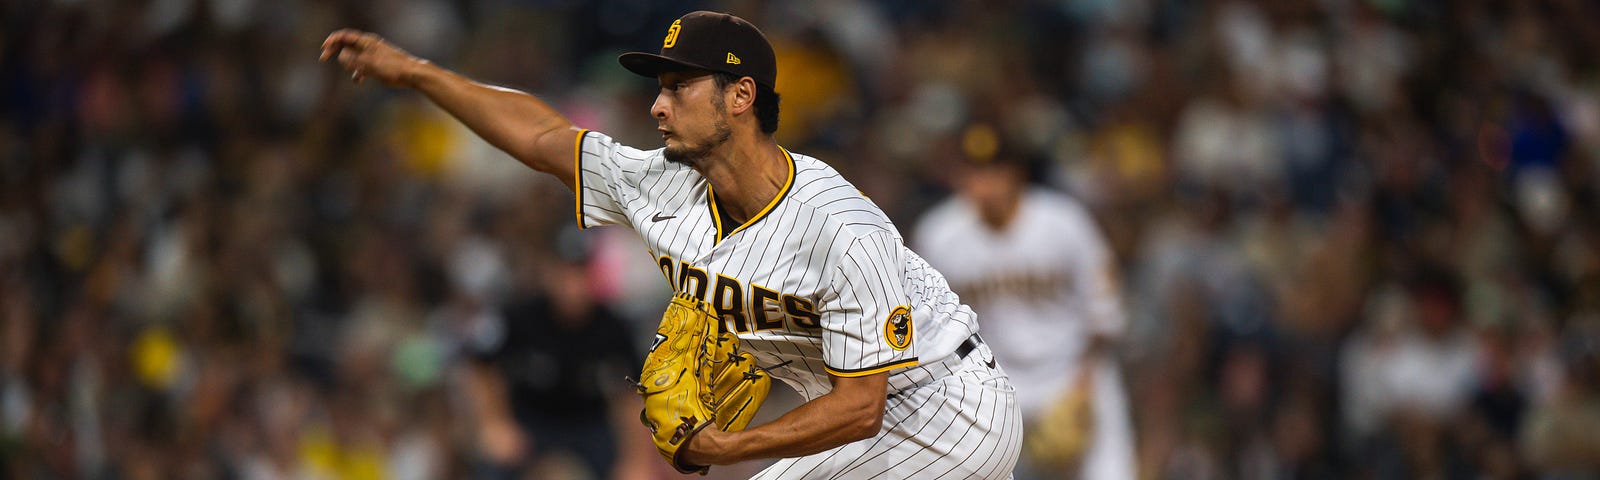 The Padres have signed RHP Yu Darvish to a New Six-Year Contract, by  FriarWire